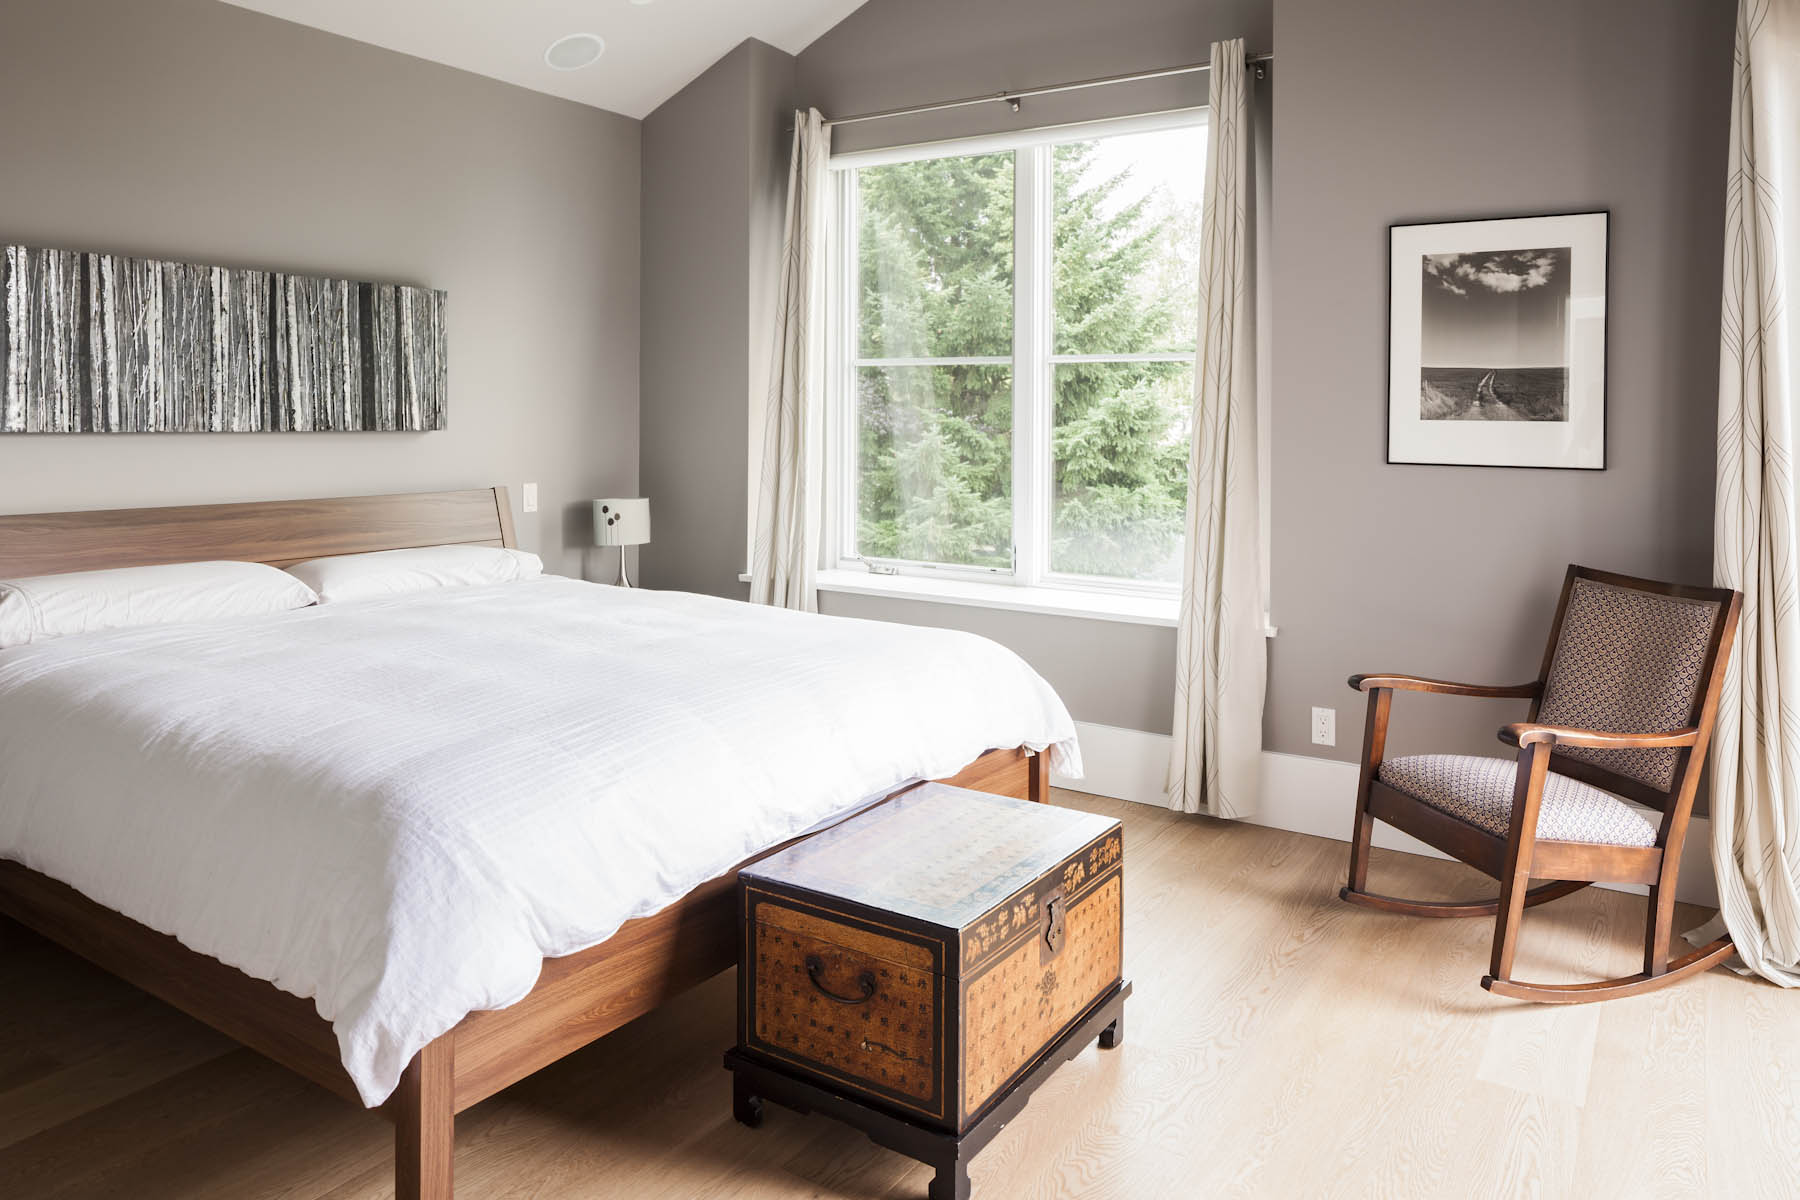 Clean and bright bedroom with modern design at the Cambie Corridor custom house.